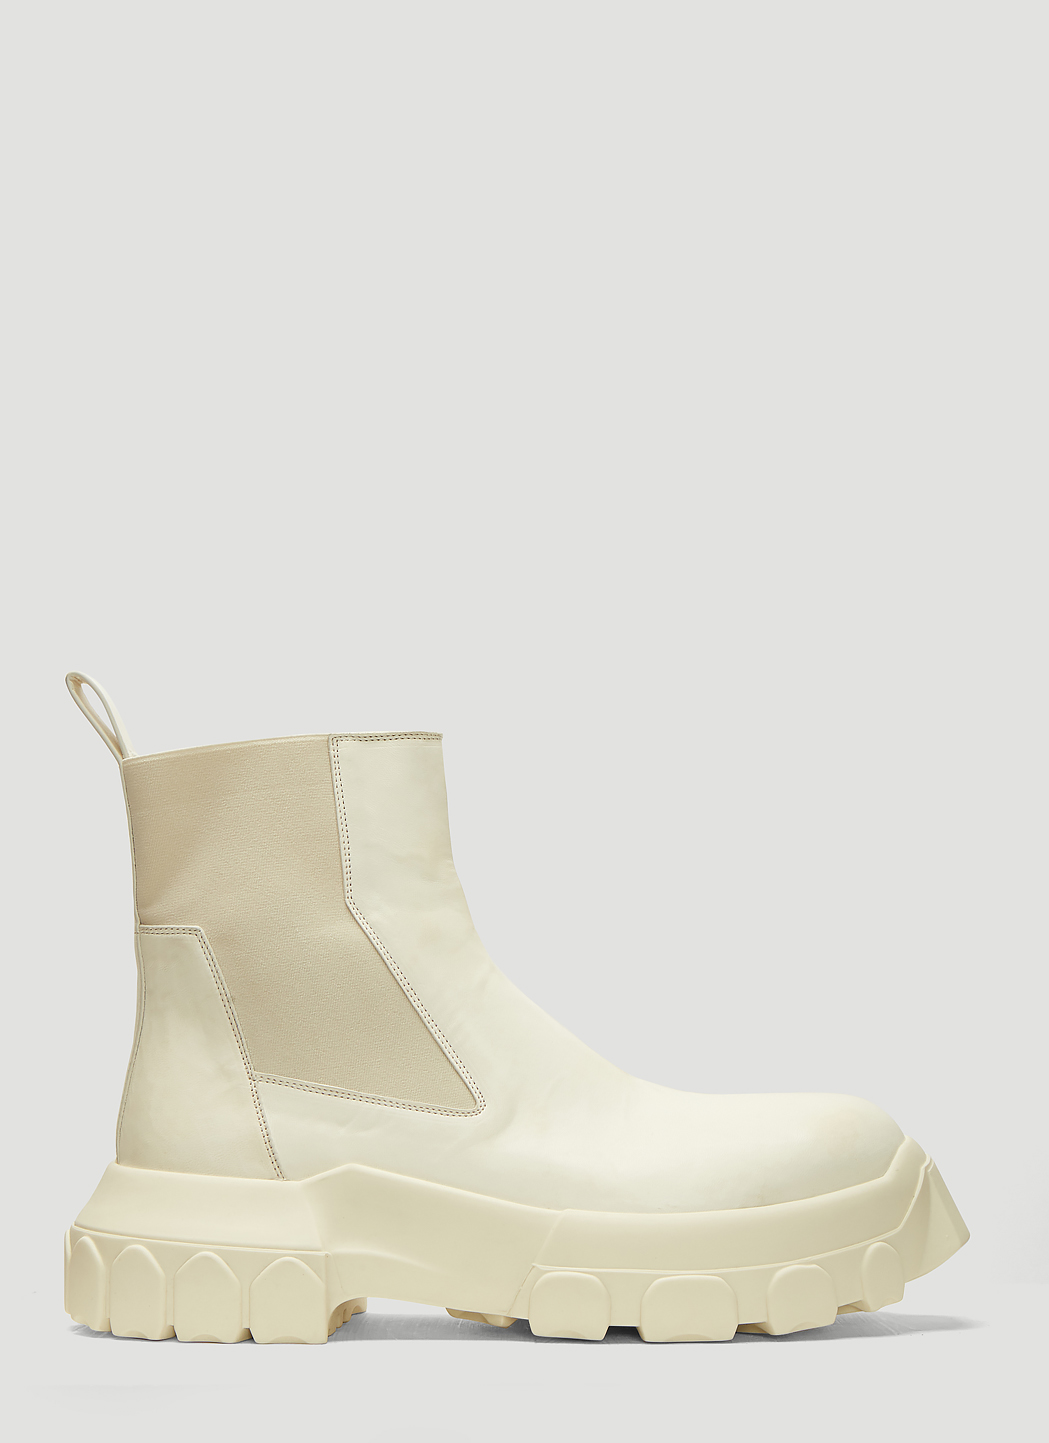 Rick Owens Bozo Tractor Beetle Boots in White | LN-CC